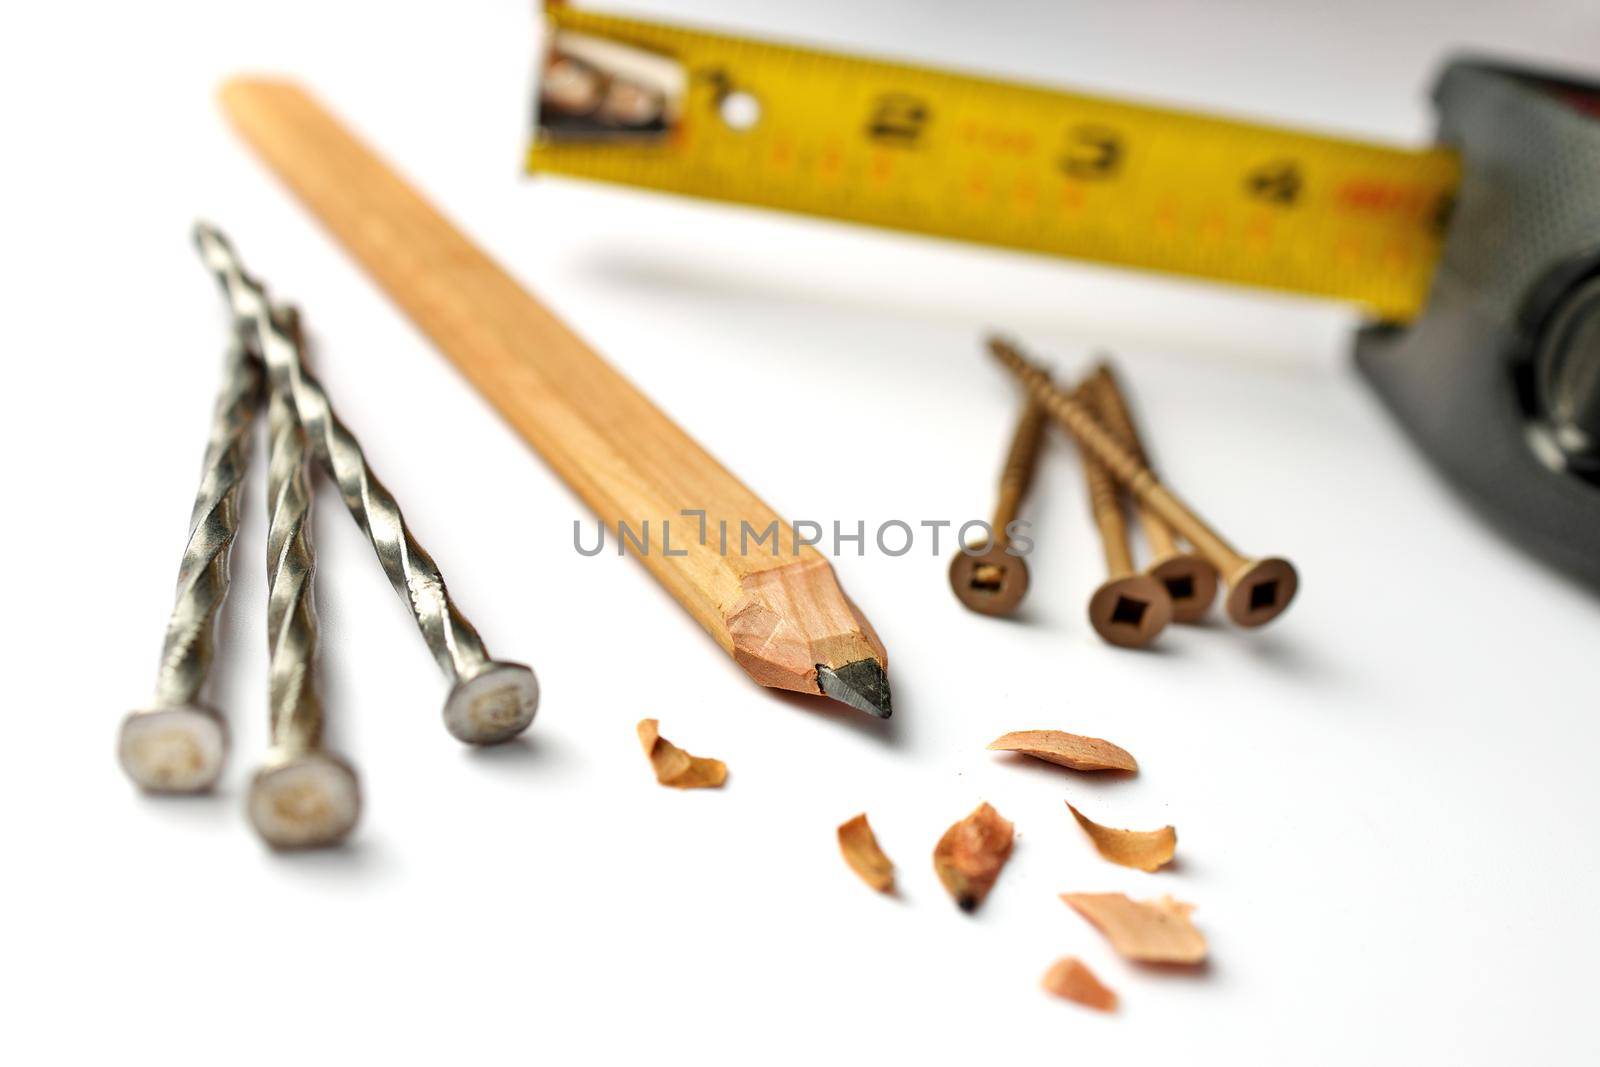 Low Angle Close up of a Carpenter's Pencil with Sharpening Shavings, Tape Measure, Framing Nails and Deck Screws on a white background. High quality photo